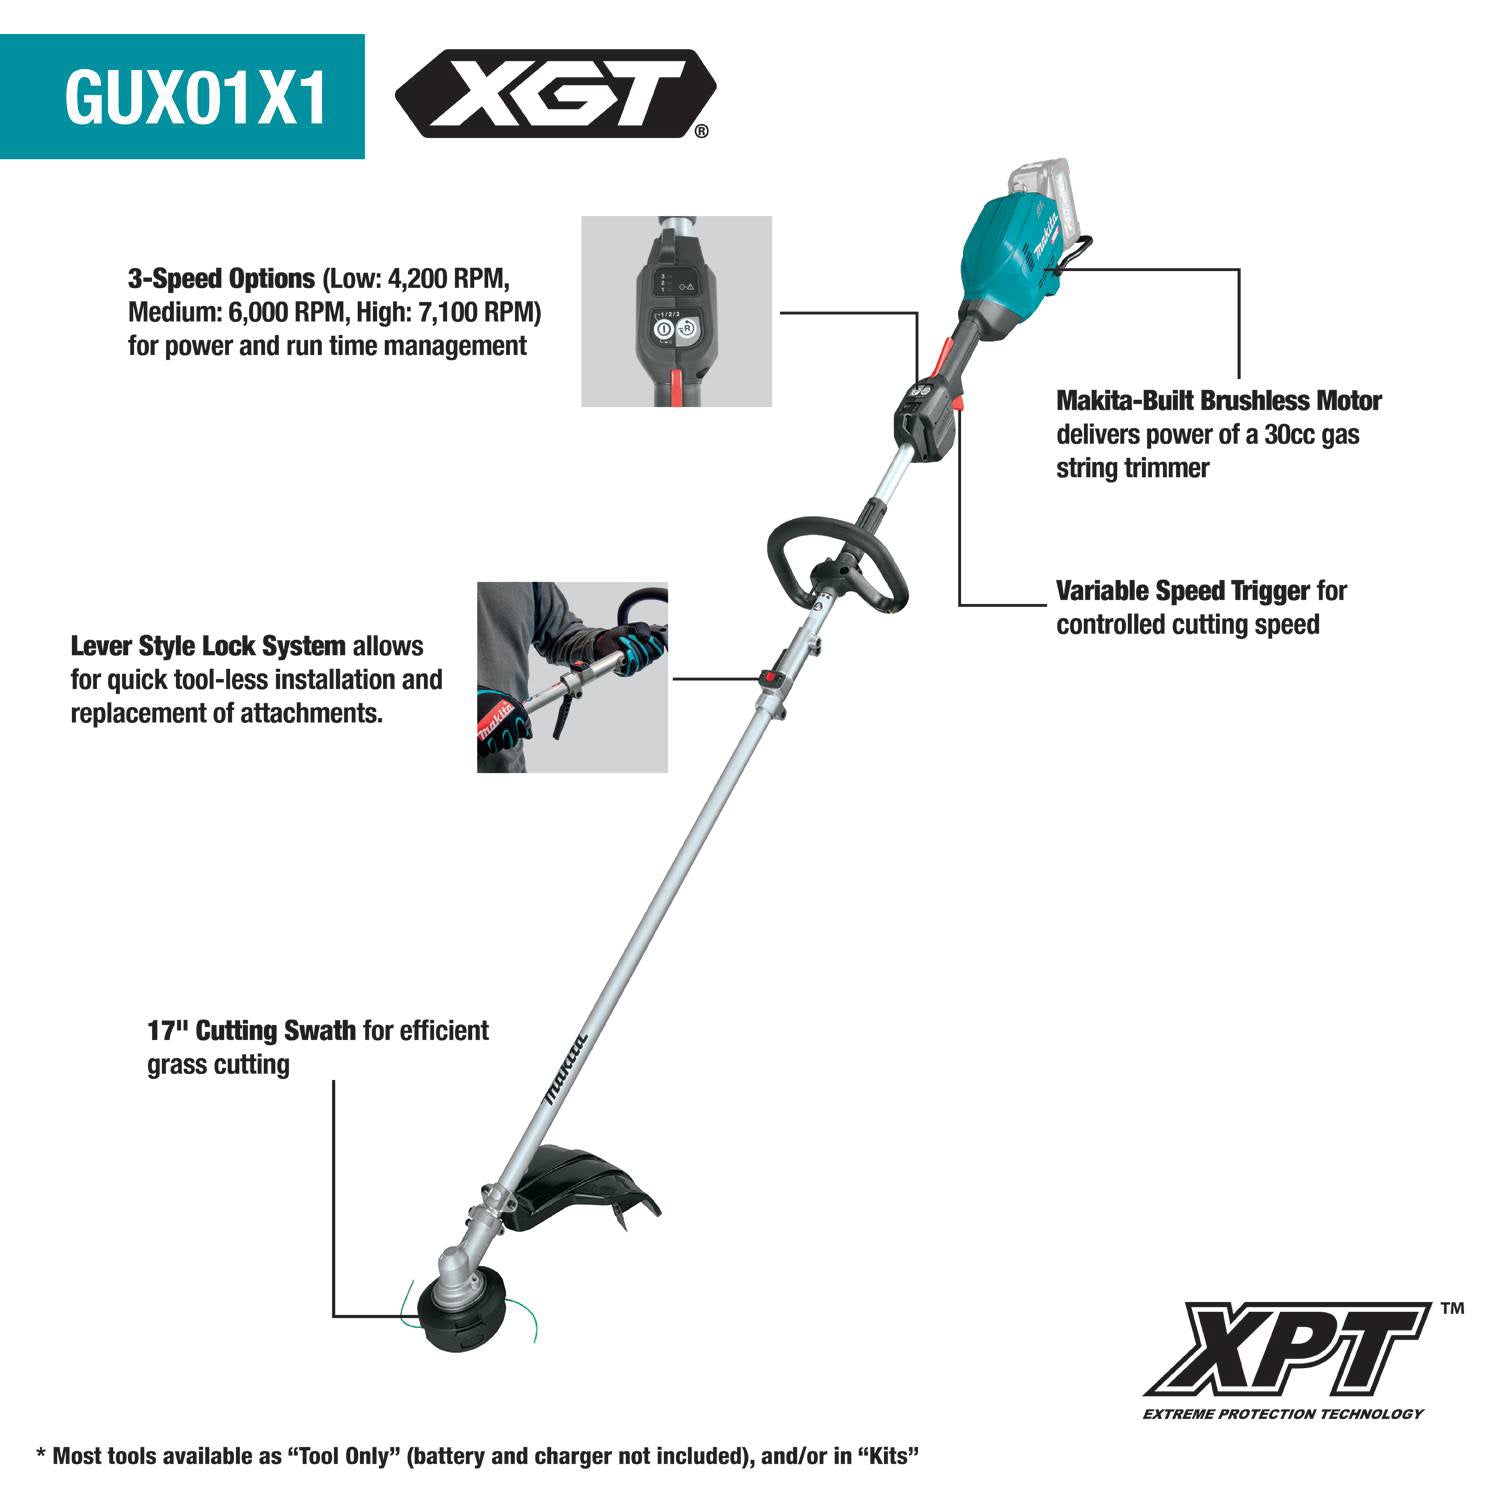 40V Max XGT Lithium-Ion Brushless Cordless Couple Shaft Power Head with 17" String Trimmer Attachment (Tool Only)